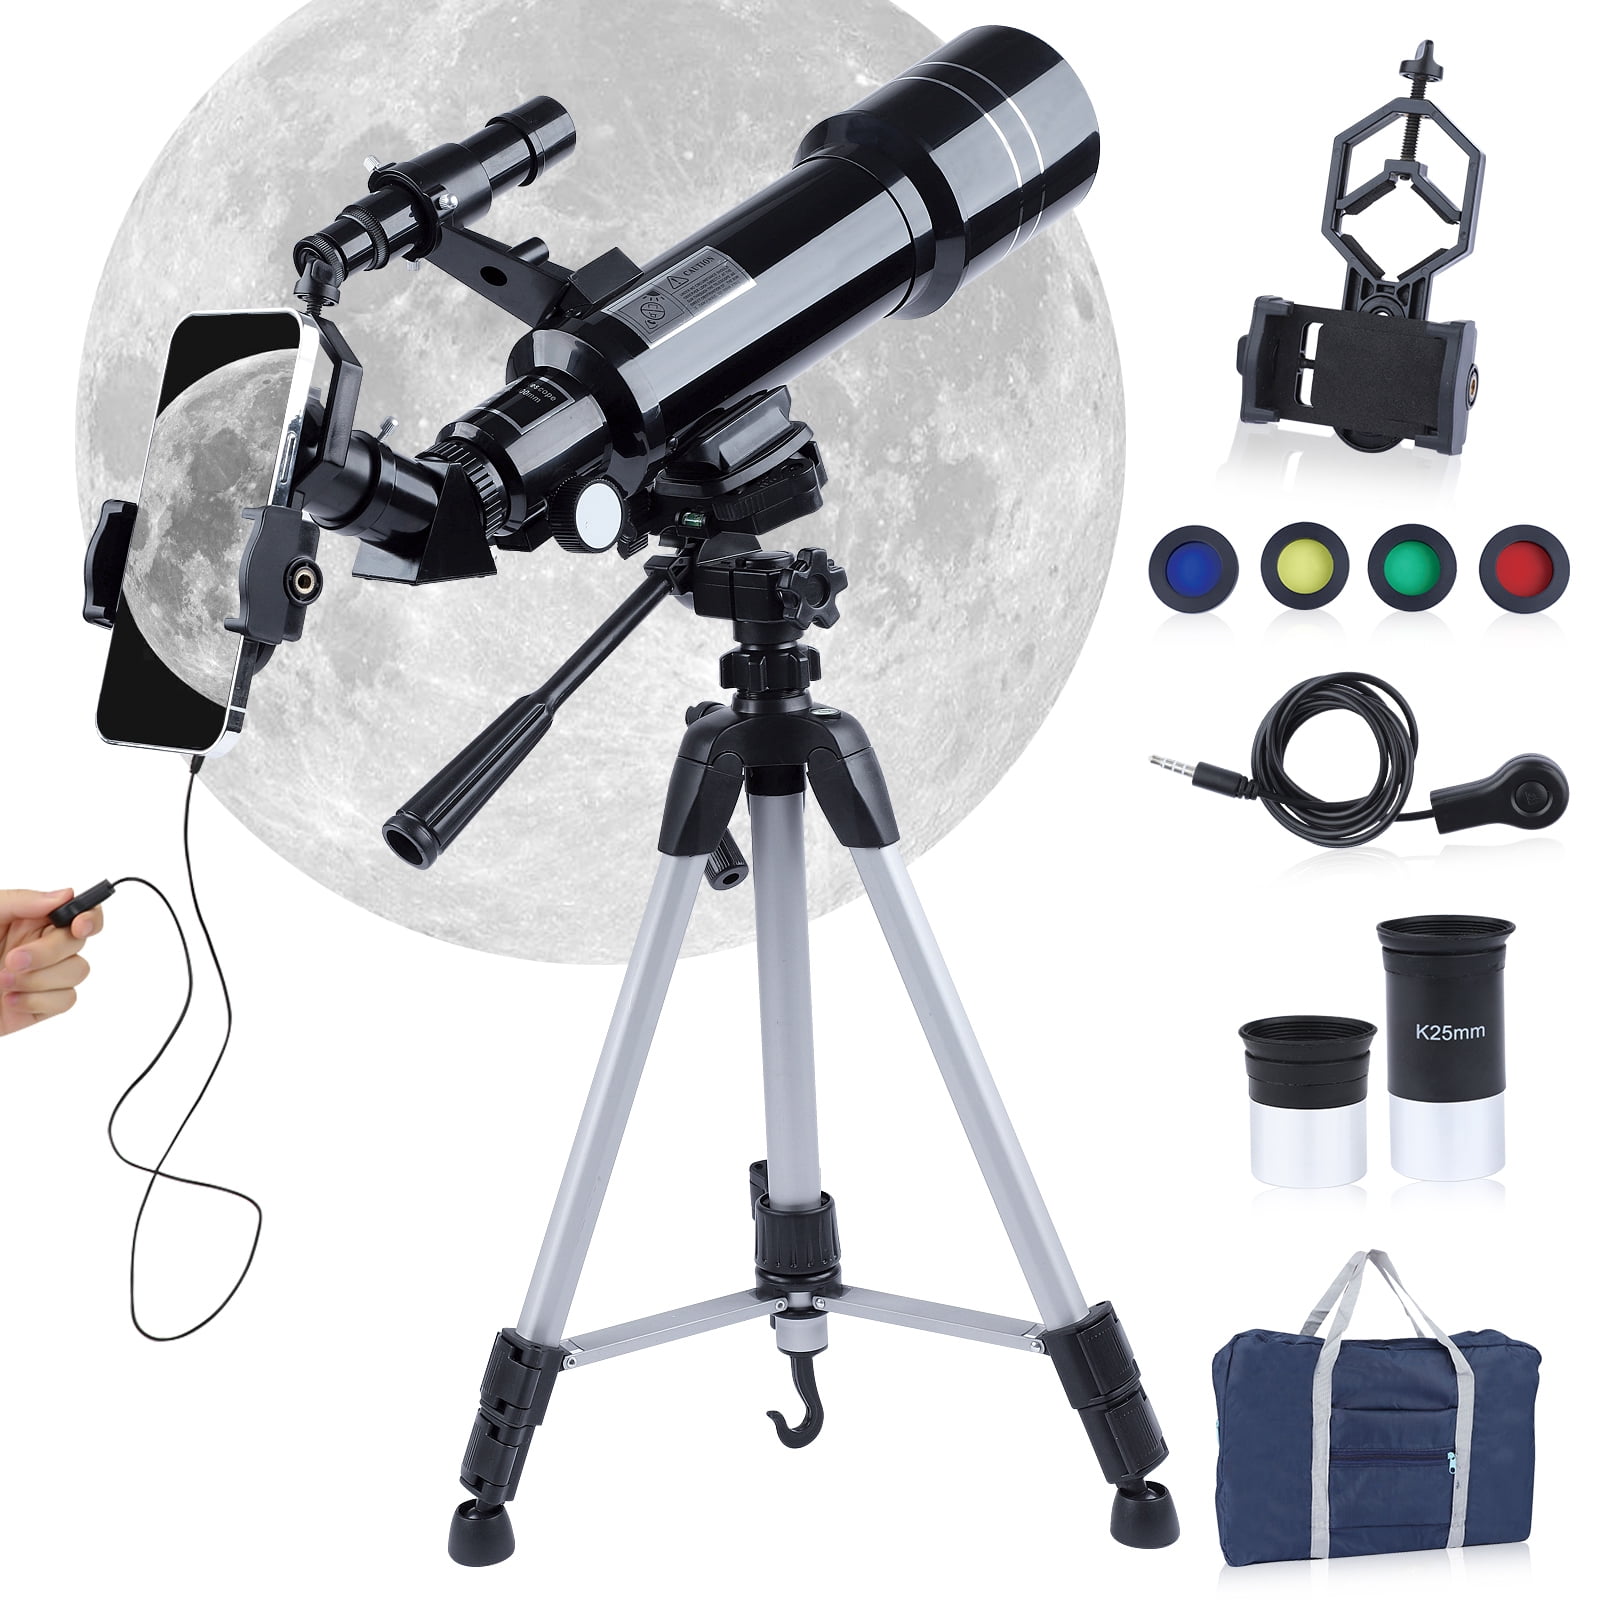 Details about   New Terrestrial Astronomical Compact Telescope Travel Scope Christmas Gift ToysA 